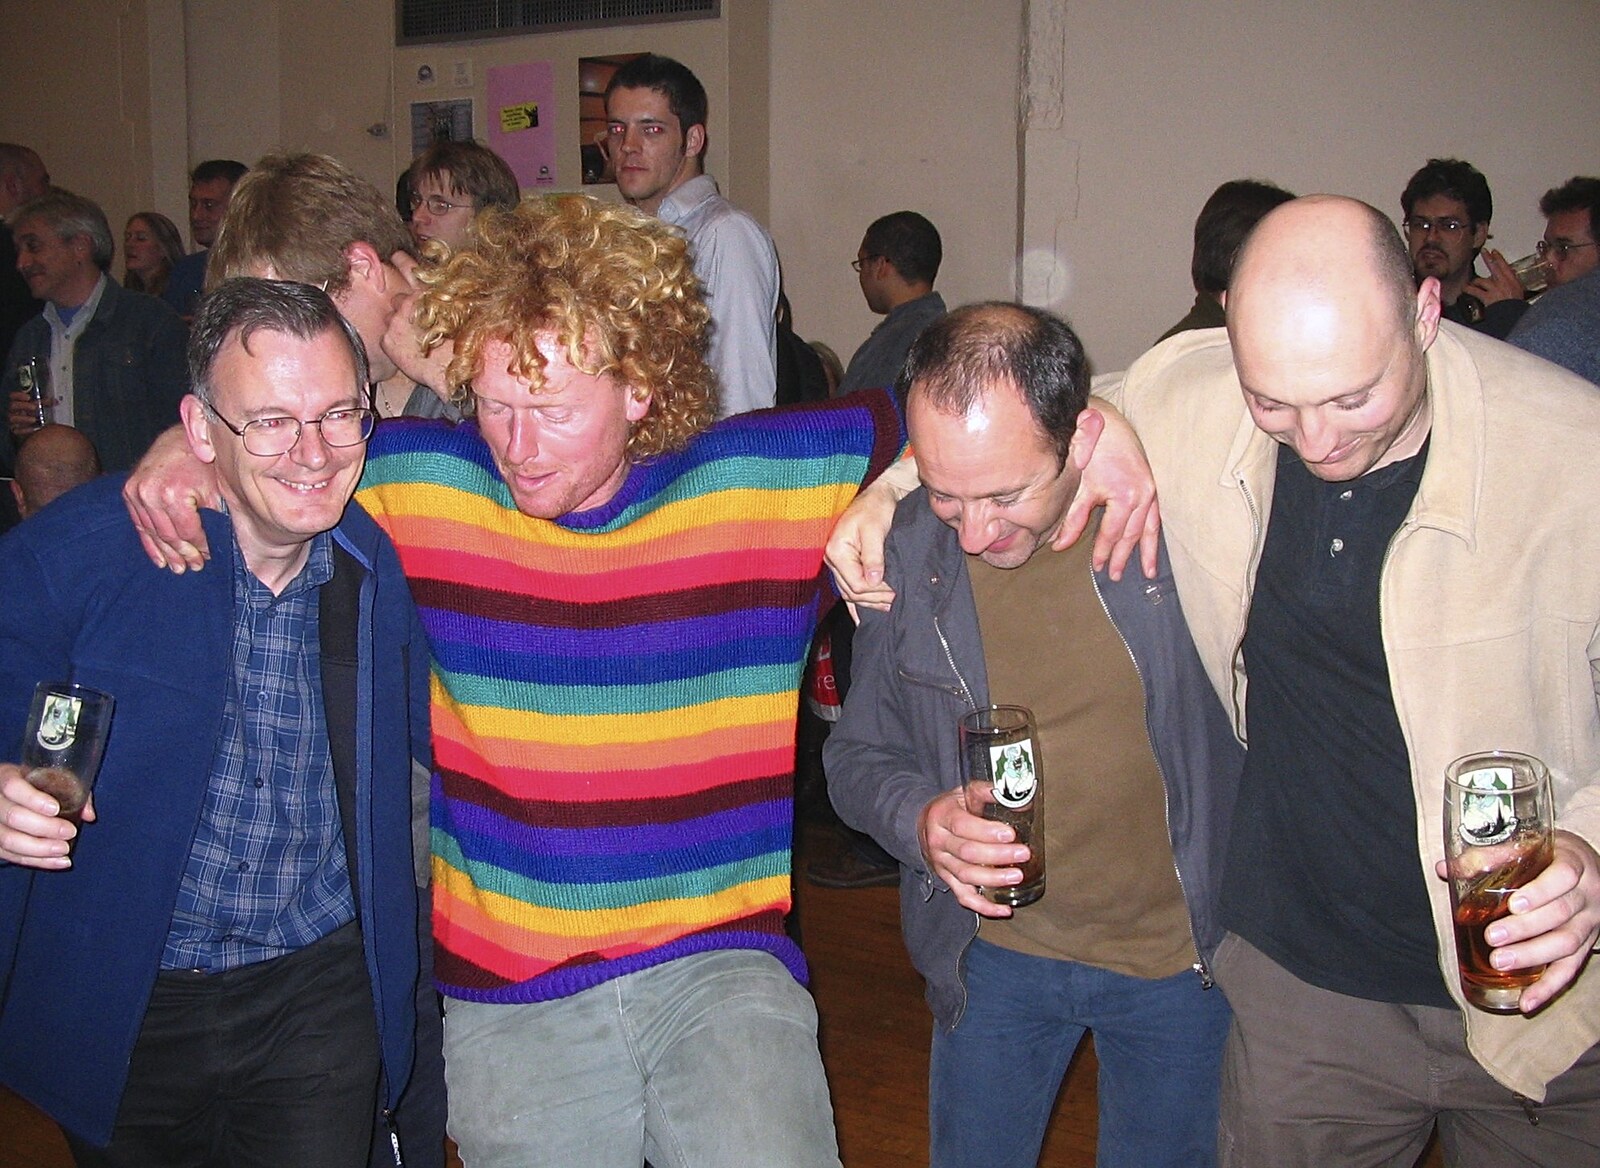 Ping-pong Peter, Wavy, DH and Gov do the hokey cokey from The Norfolk and Norwich Beer Festival, St. Andrew's Hall, Norwich - 27th October 2004